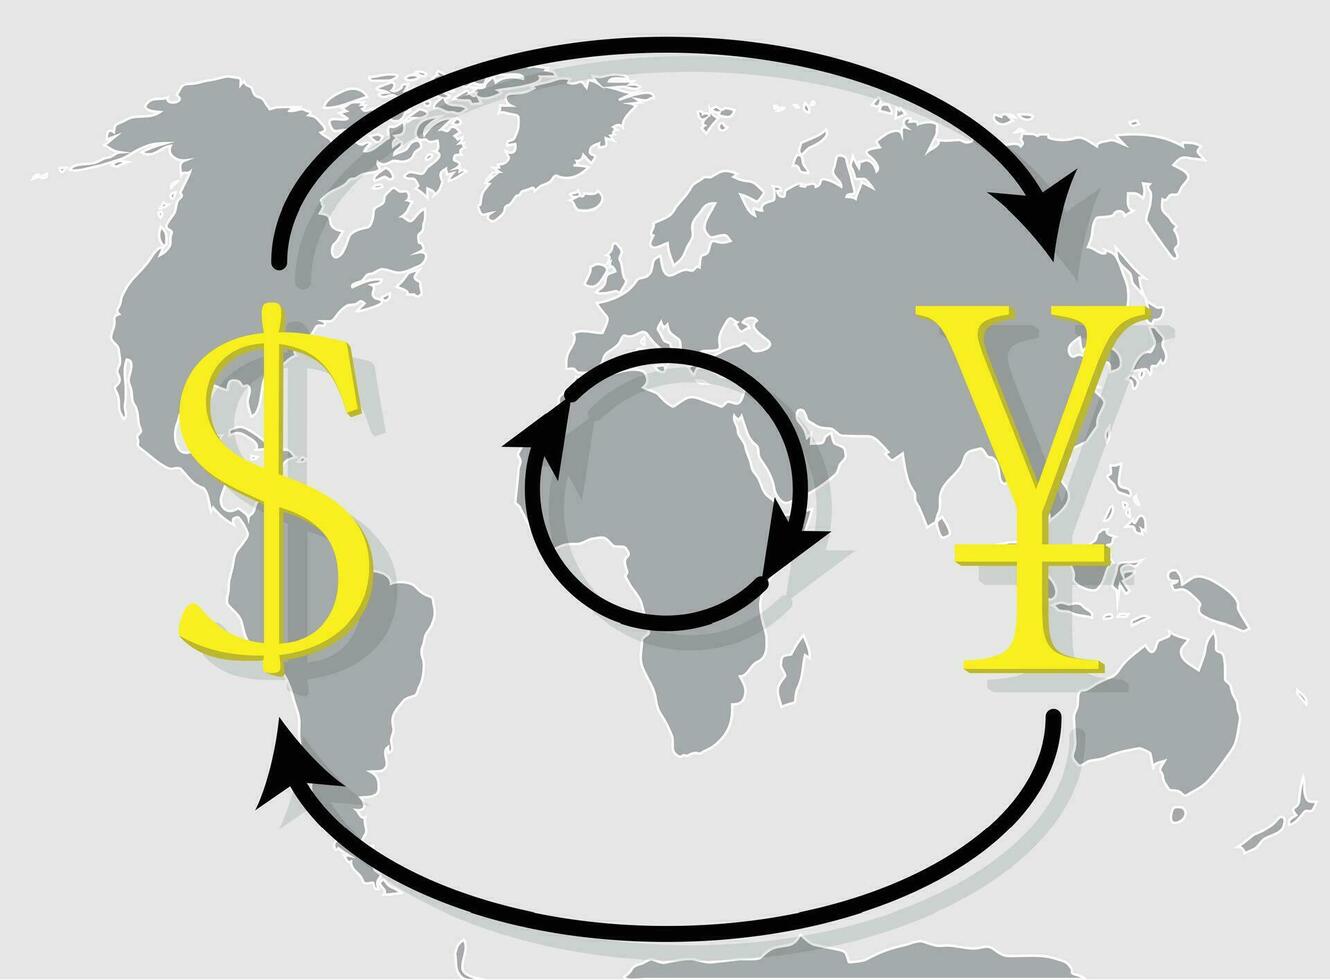 Currency exchange japanese yen dollar on world map background vector